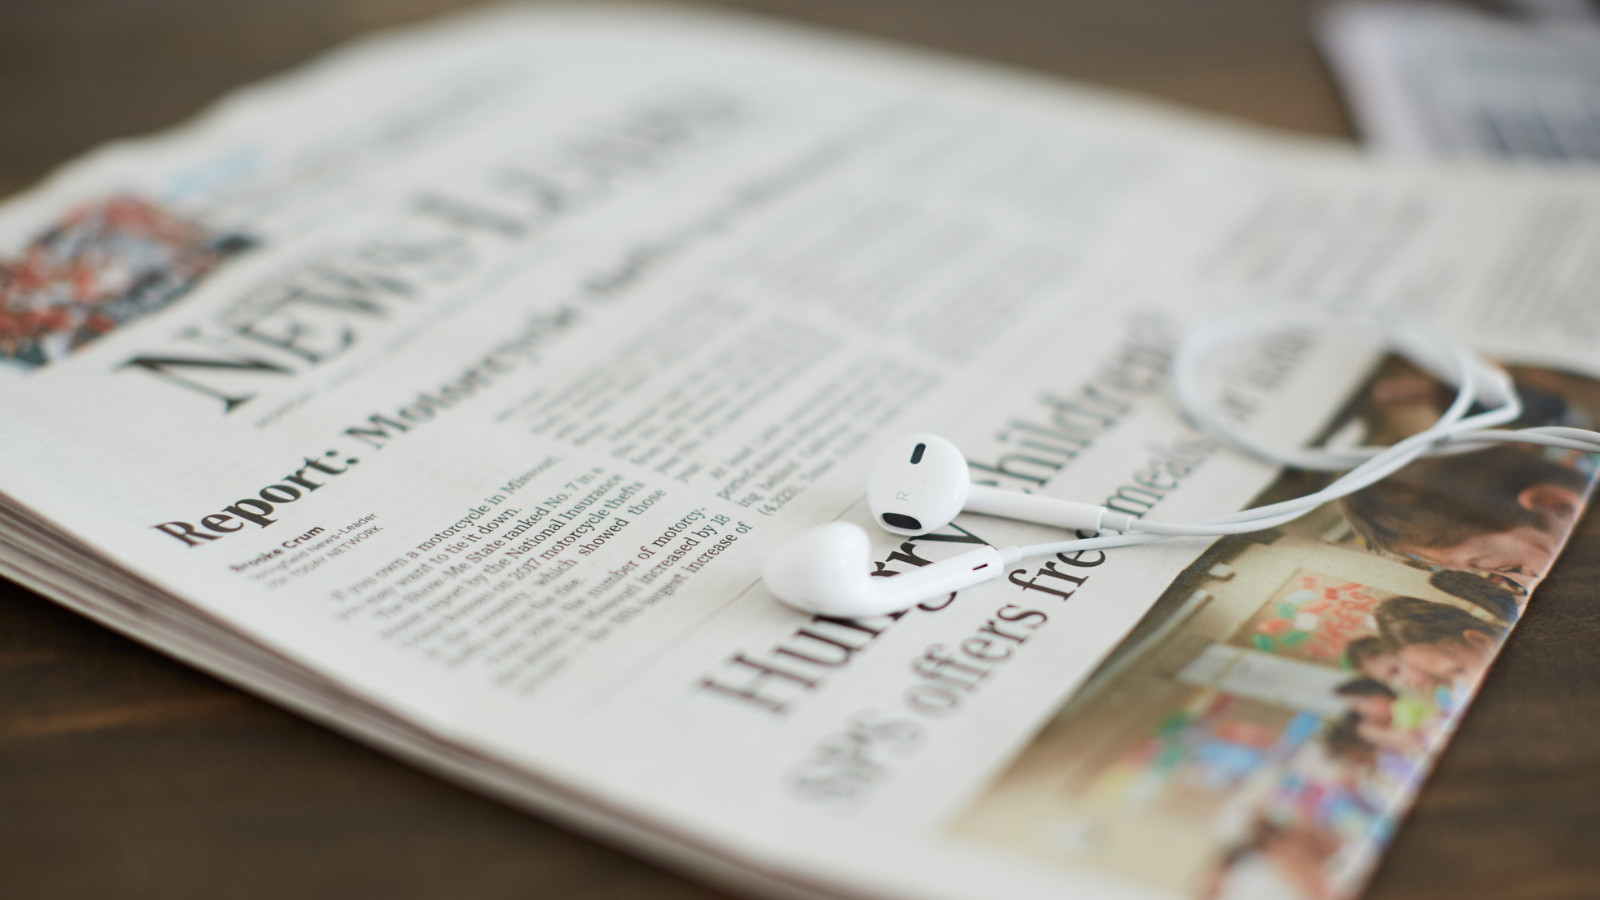 Newspaper with earbuds over it